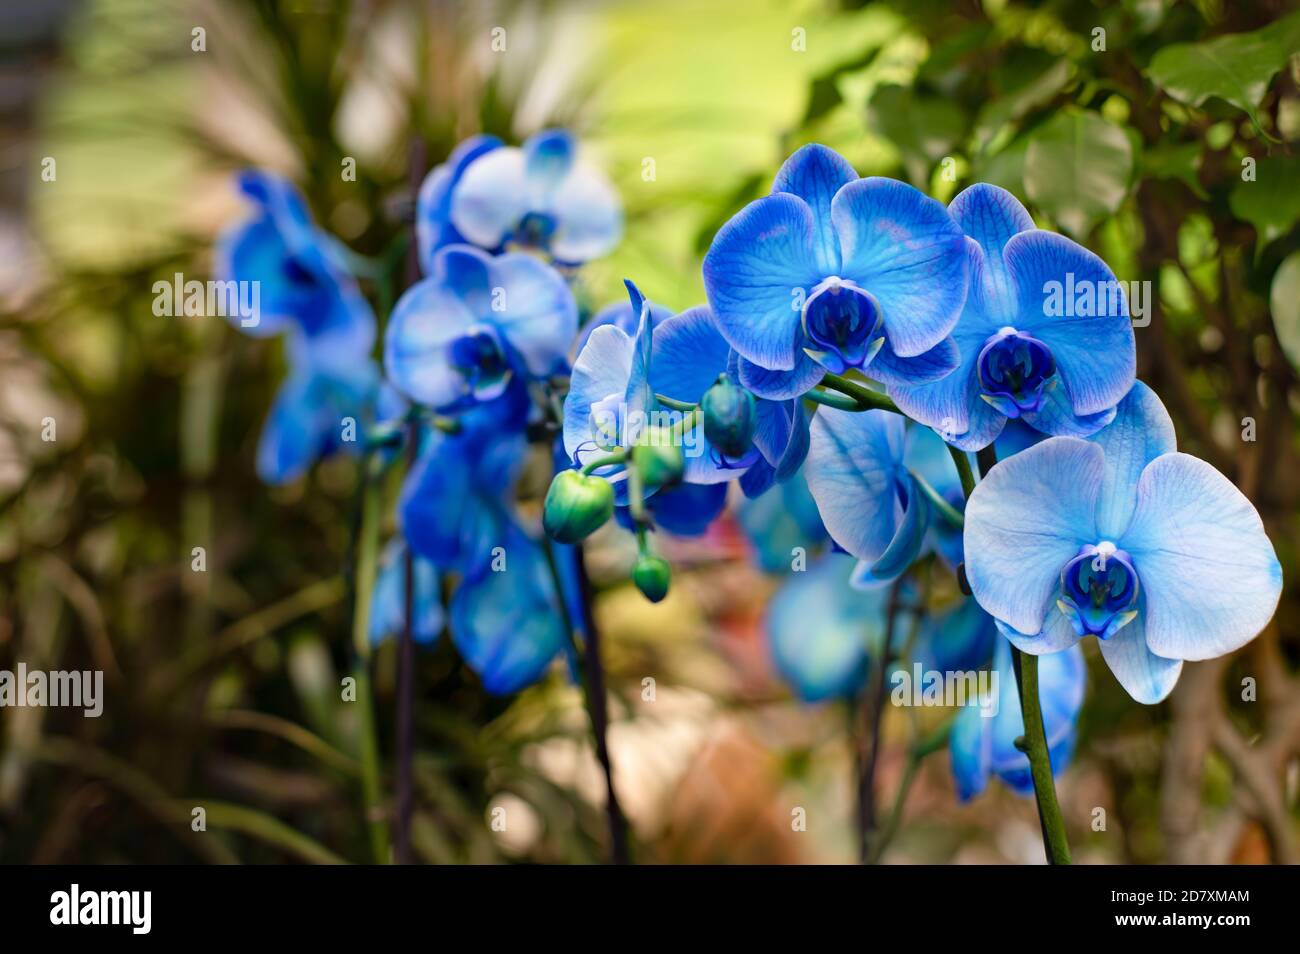 Are Blue Orchids Real? Here's What to Know